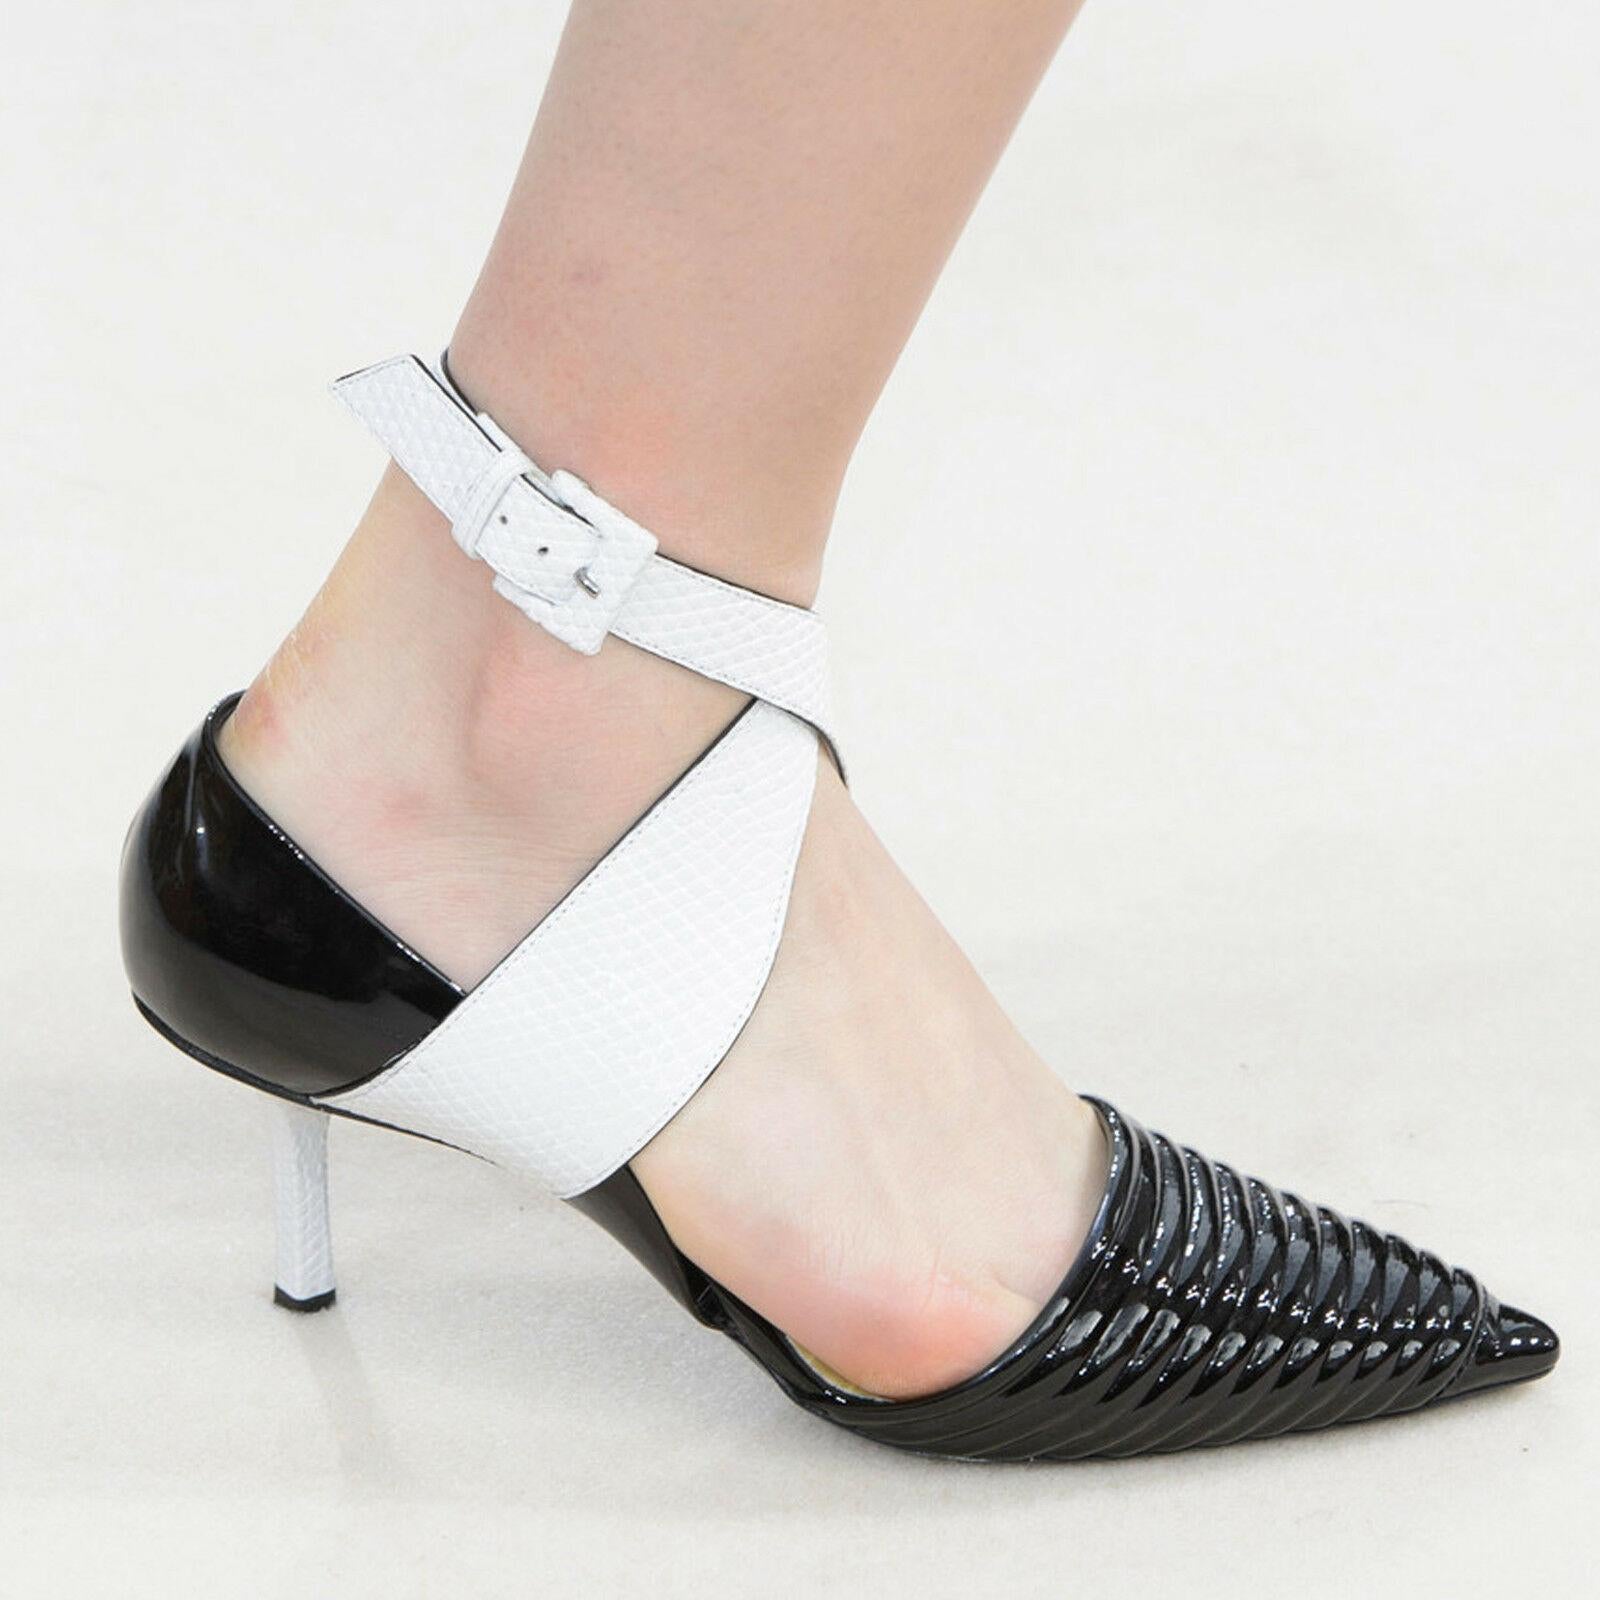 runway LOUIS VUITTON black patent white cross ankle strap dorsay pumps EU38.5 
Reference: TGAS/A02388 
Brand: Louis Vuitton 
Collection: Fall Winter 2015 Runway 
Material: Leather 
Color: Black 
Pattern: Solid 
Closure: Ankle Strap 
Extra Detail: